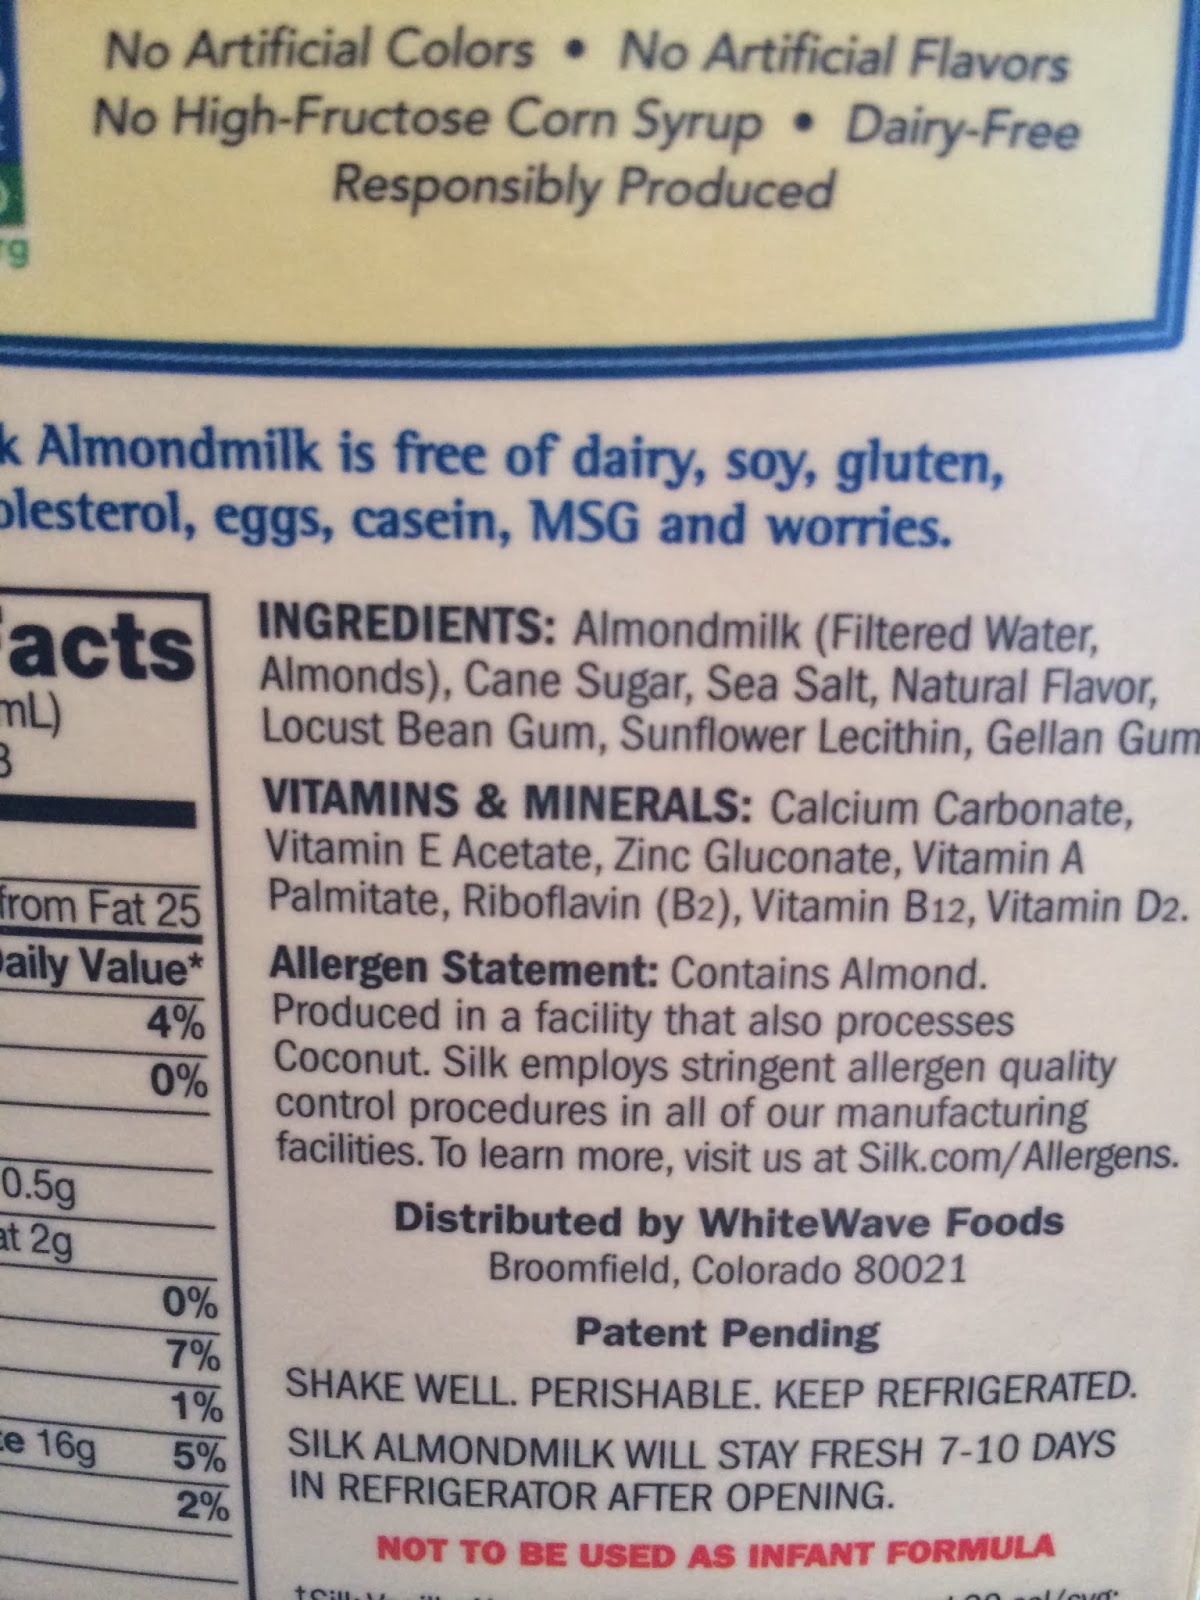 What are the ingredients in almond milk?